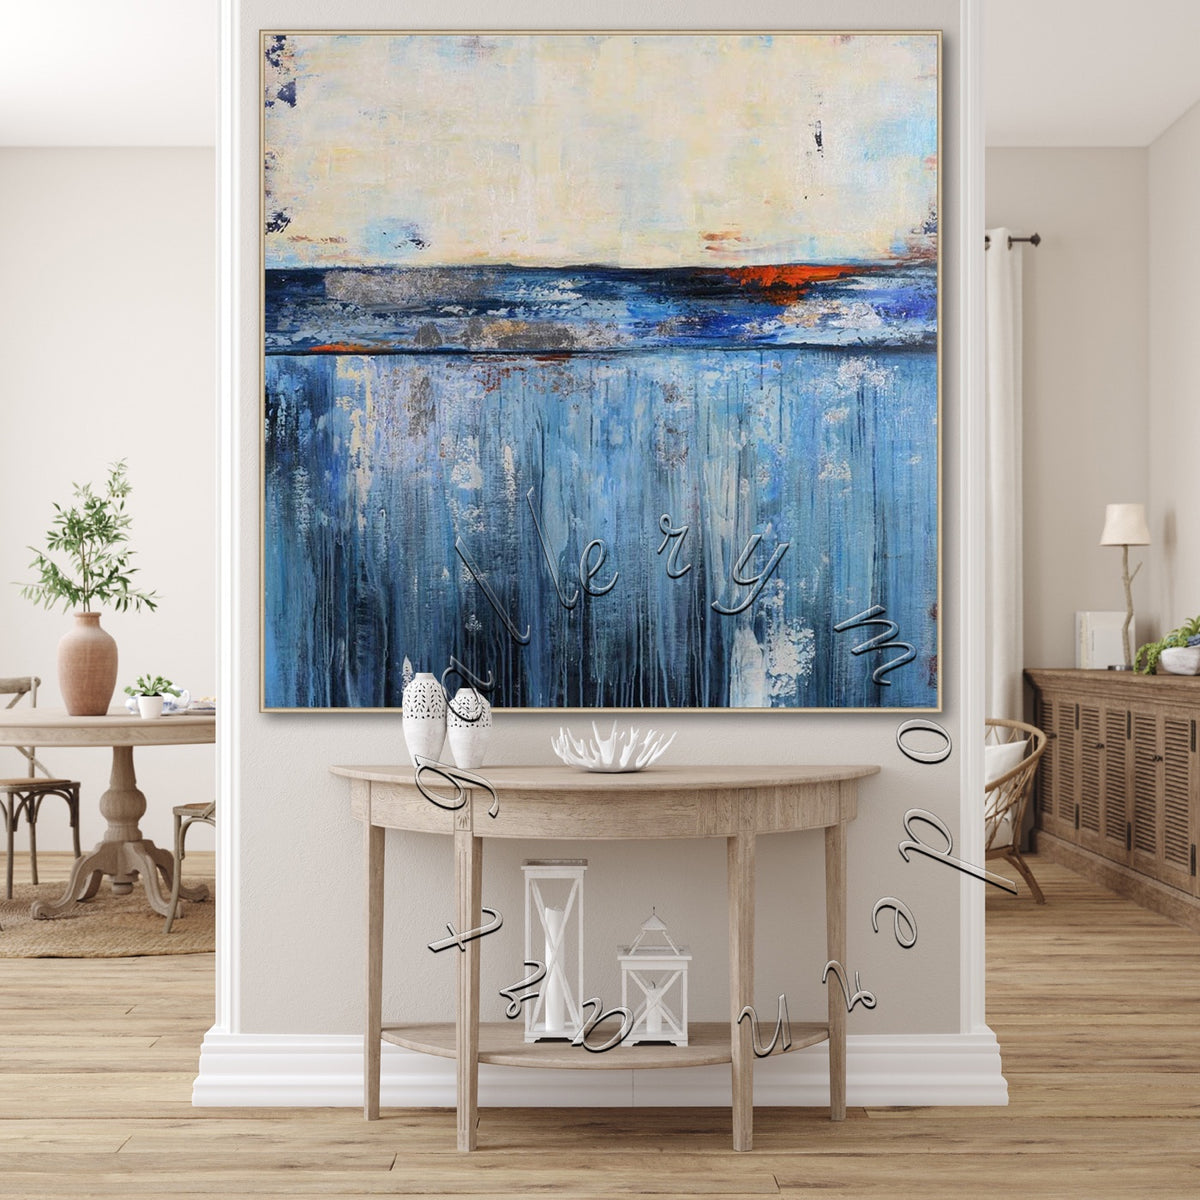 Abstract Ocean Canvas Painting, Original Square Wall Art